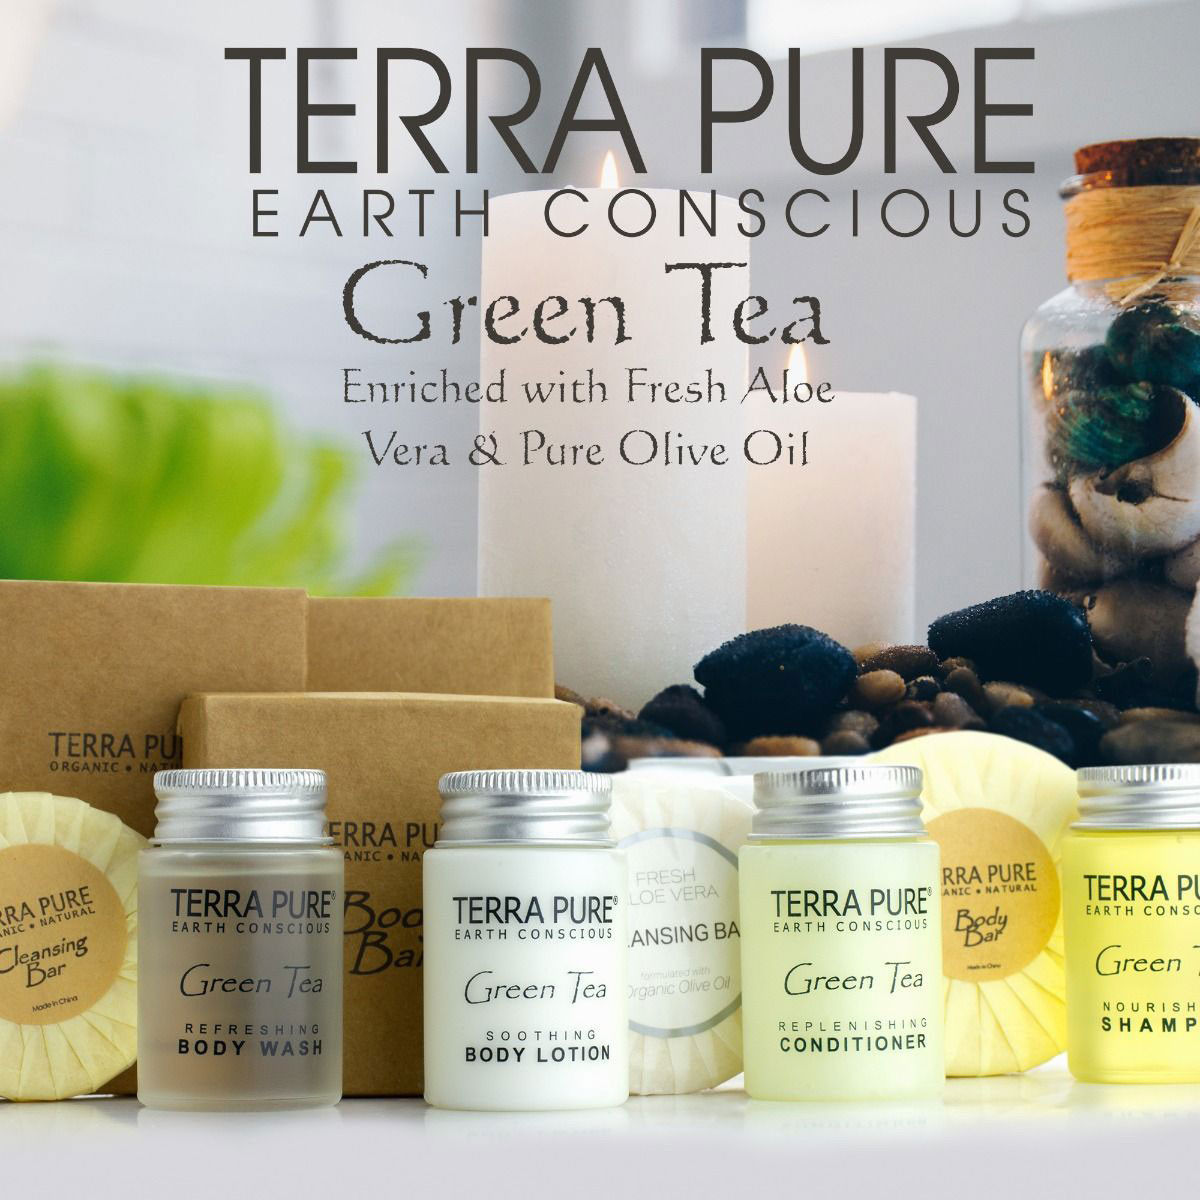 What is excluded from TERRA PURE GREEN TEA Collection's terra pure products?